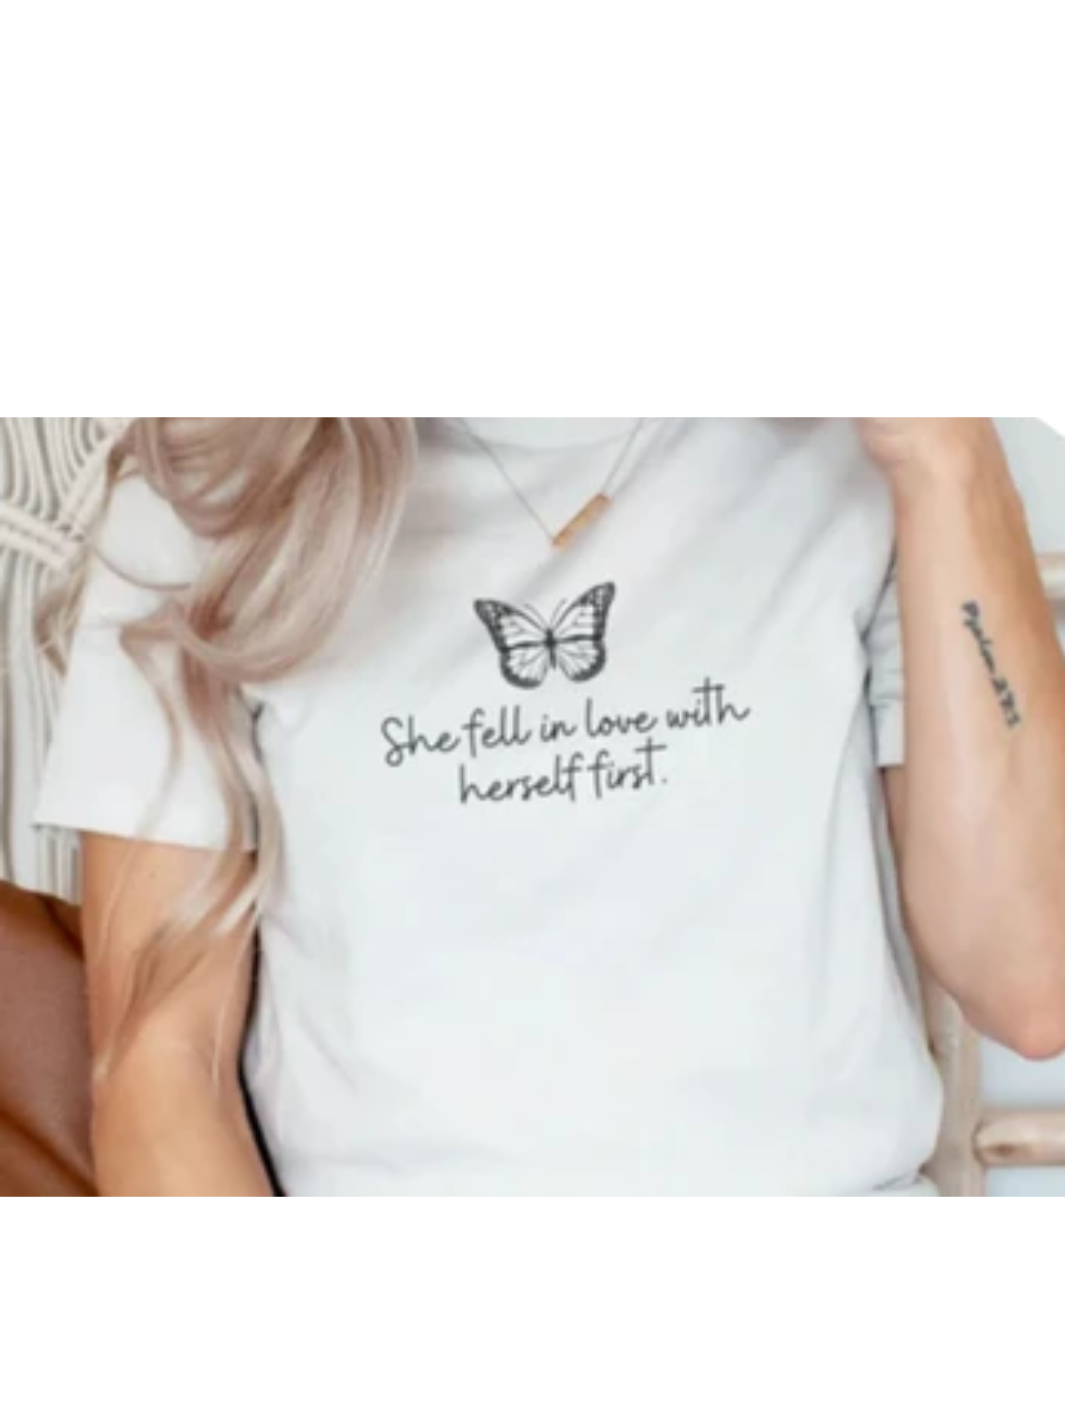 In Love With Herself Butterfly Graphic Tee (med & large)